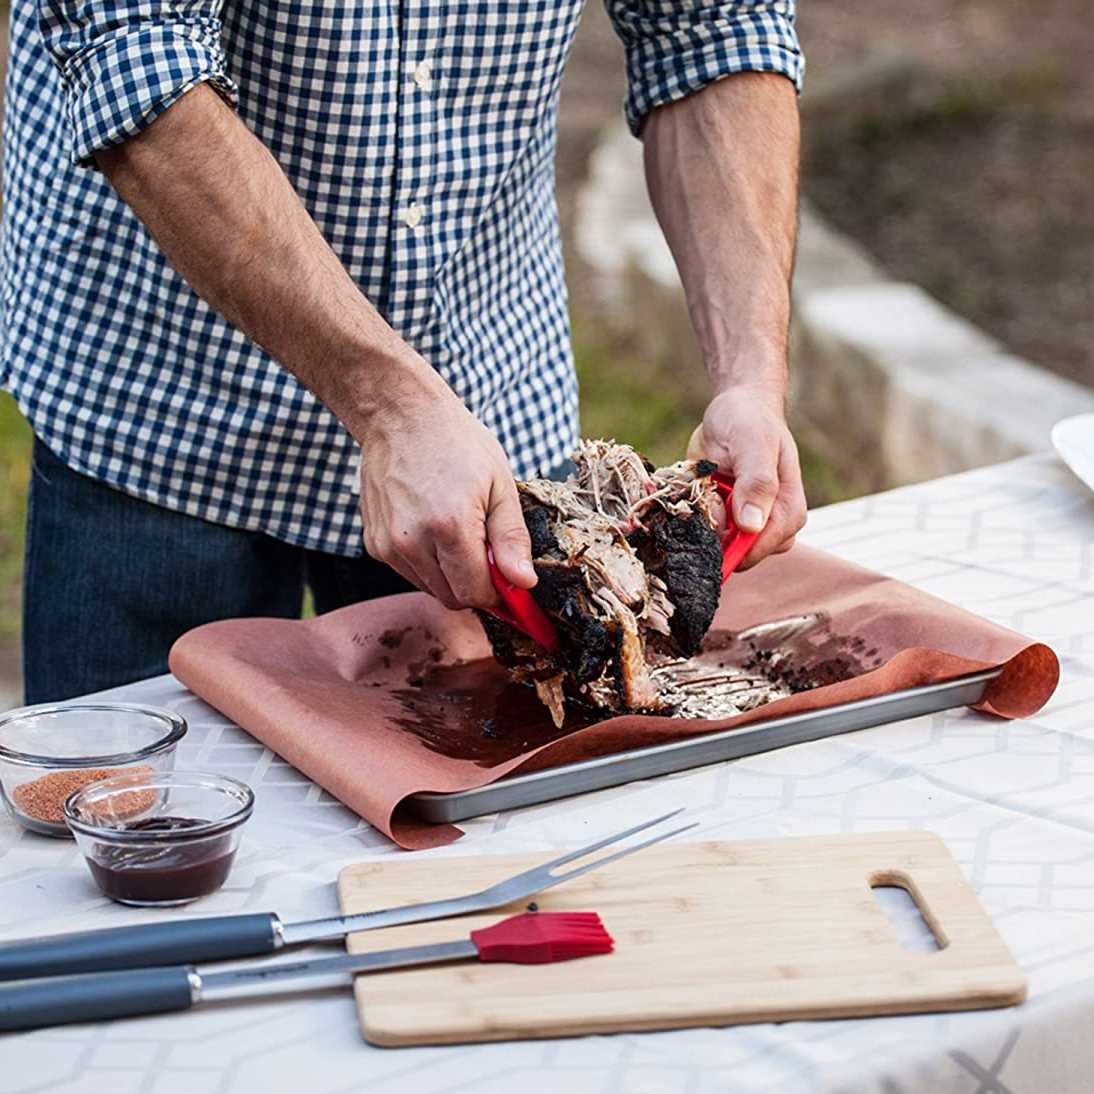 https://favoriteguygifts.com/wp-content/uploads/2020/11/Grillaholics-BBQ-Meat-Shredder-Claws-Lifting-Meat-Badass-Birthday-Gifts-For-Guys.jpg